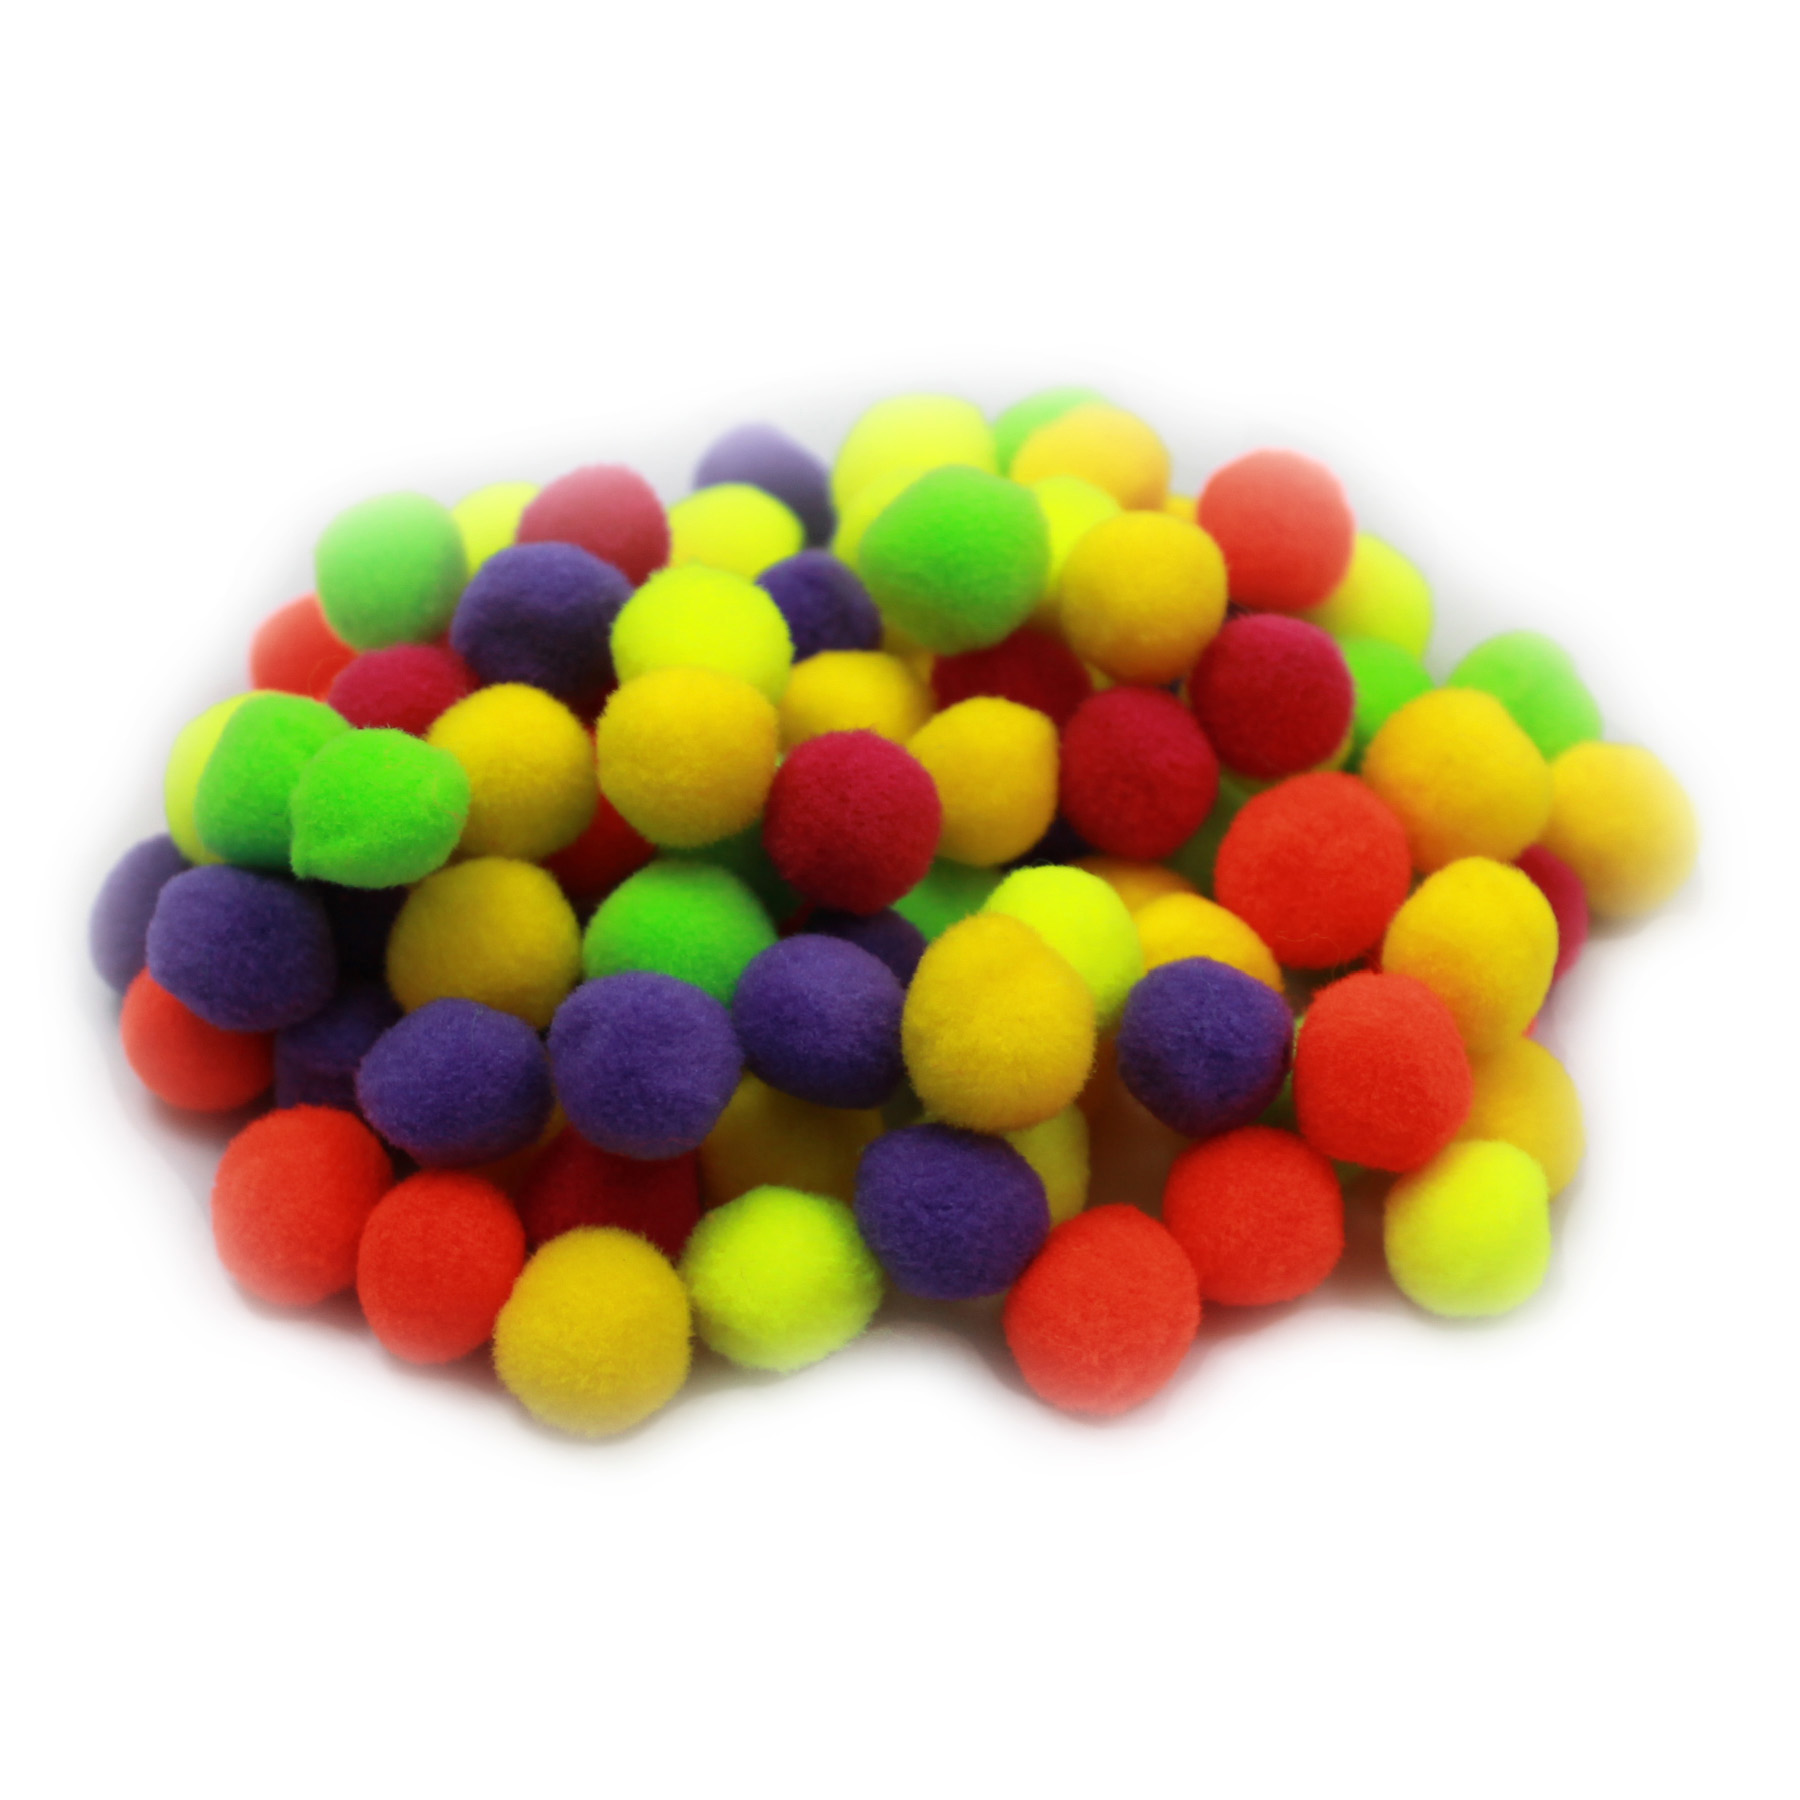 Creative Arts Pom-Poms, 1/2", Hot Colors, Pack of 100